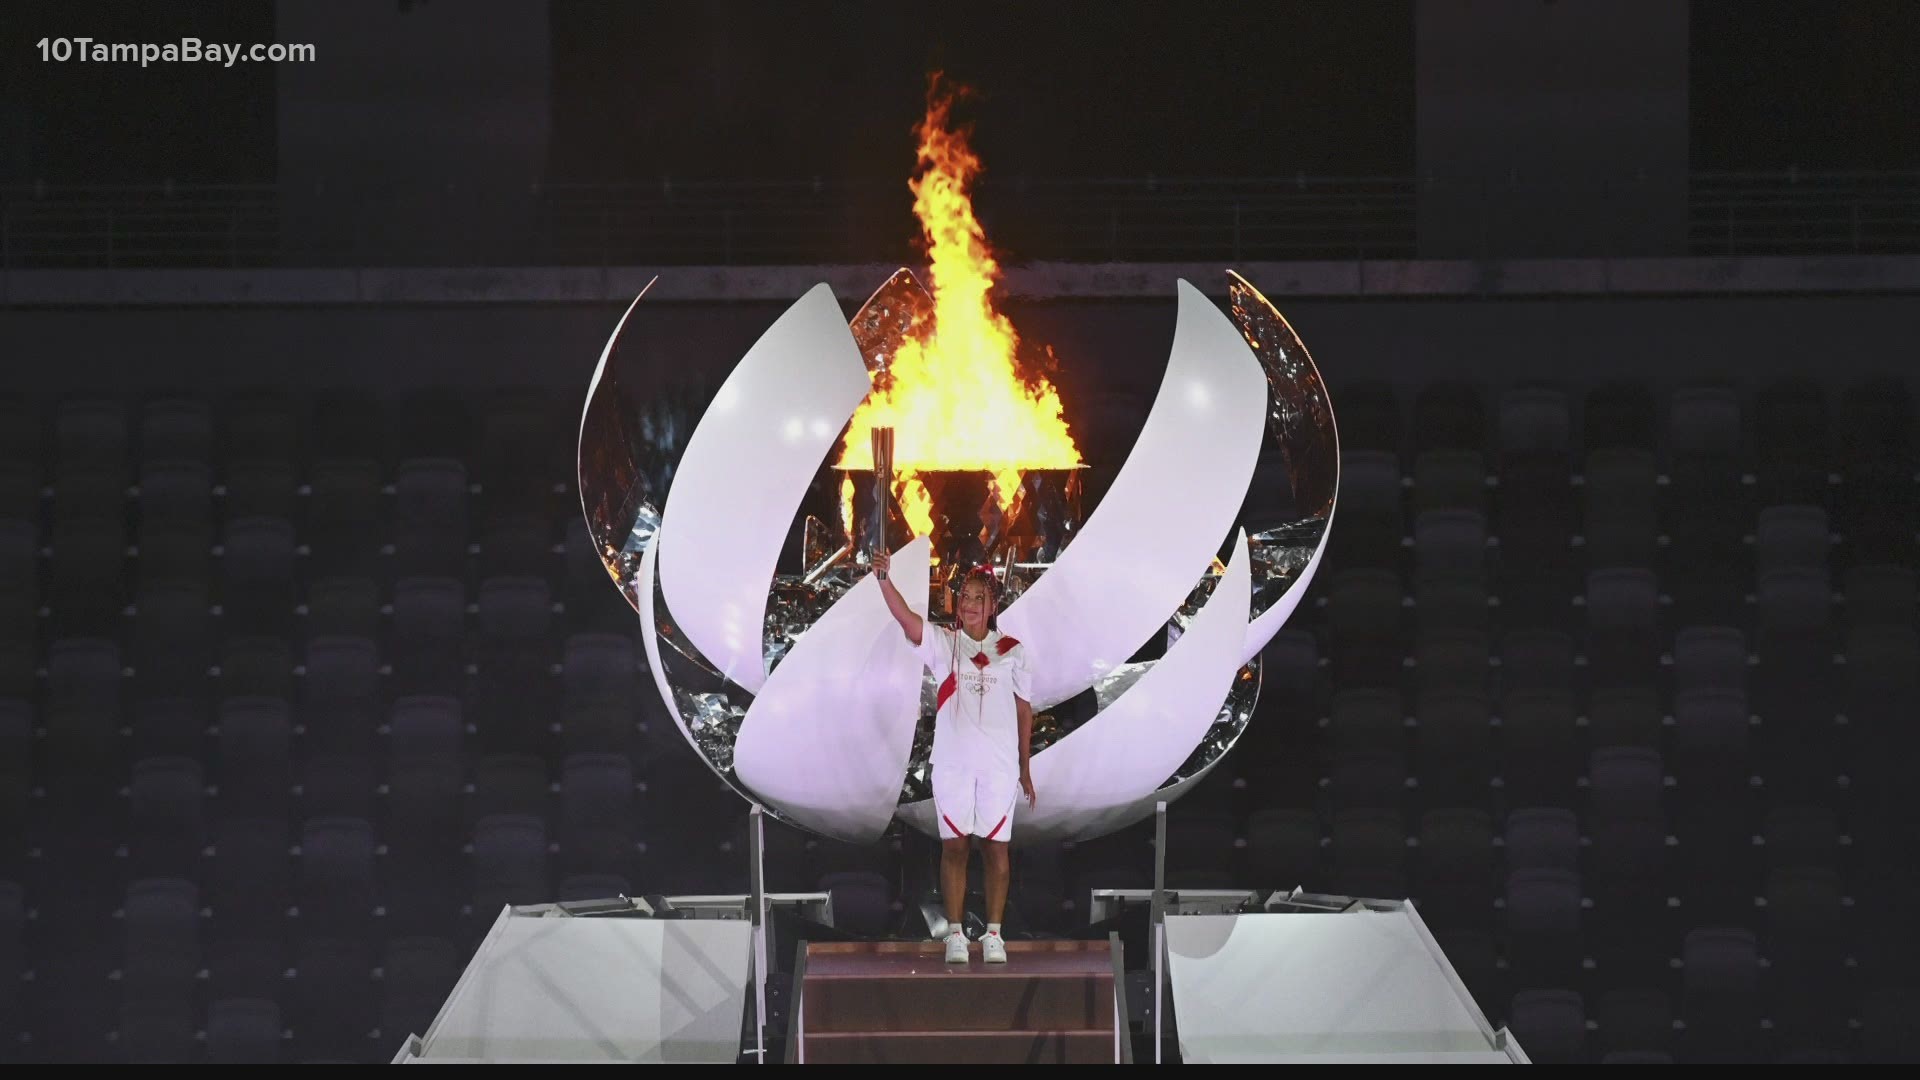 Osaka climbed the stairs to light the flame inside of the stadium in Tokyo, kicking off the much anticipated games.